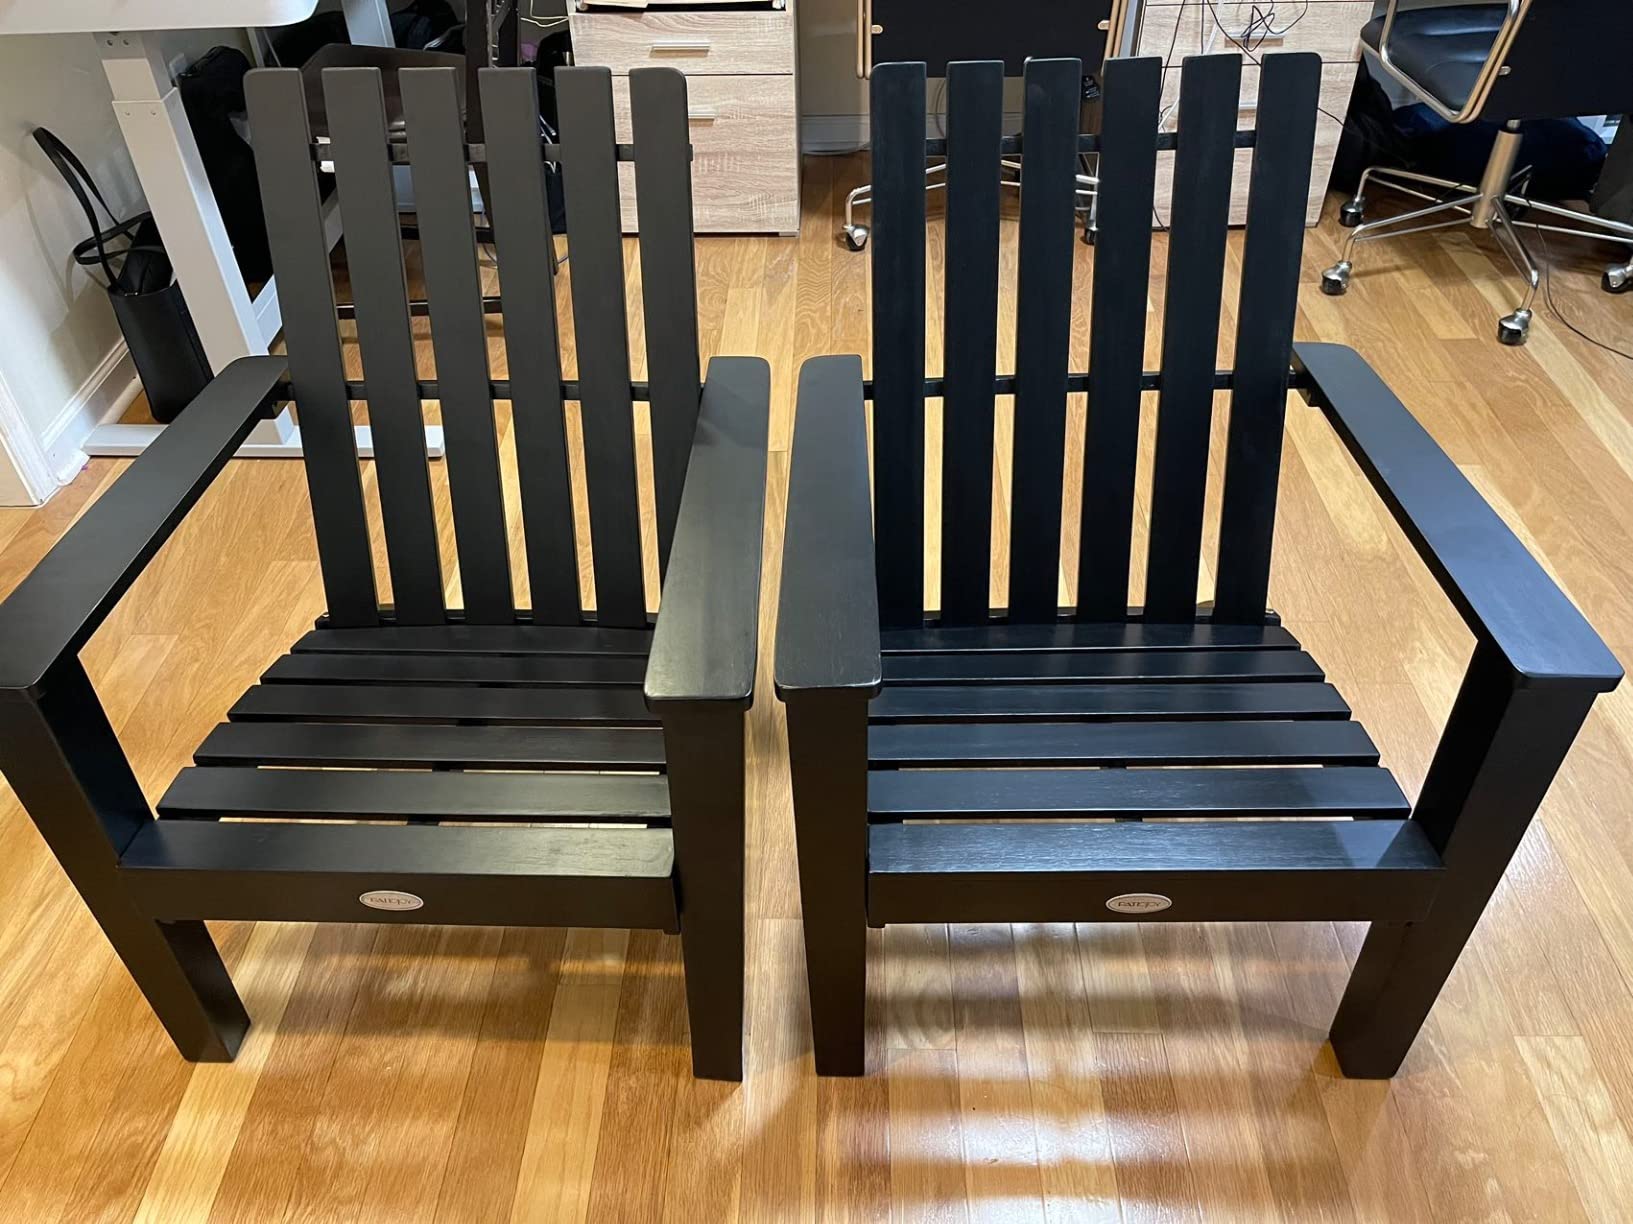 Nice and Solid Chairs